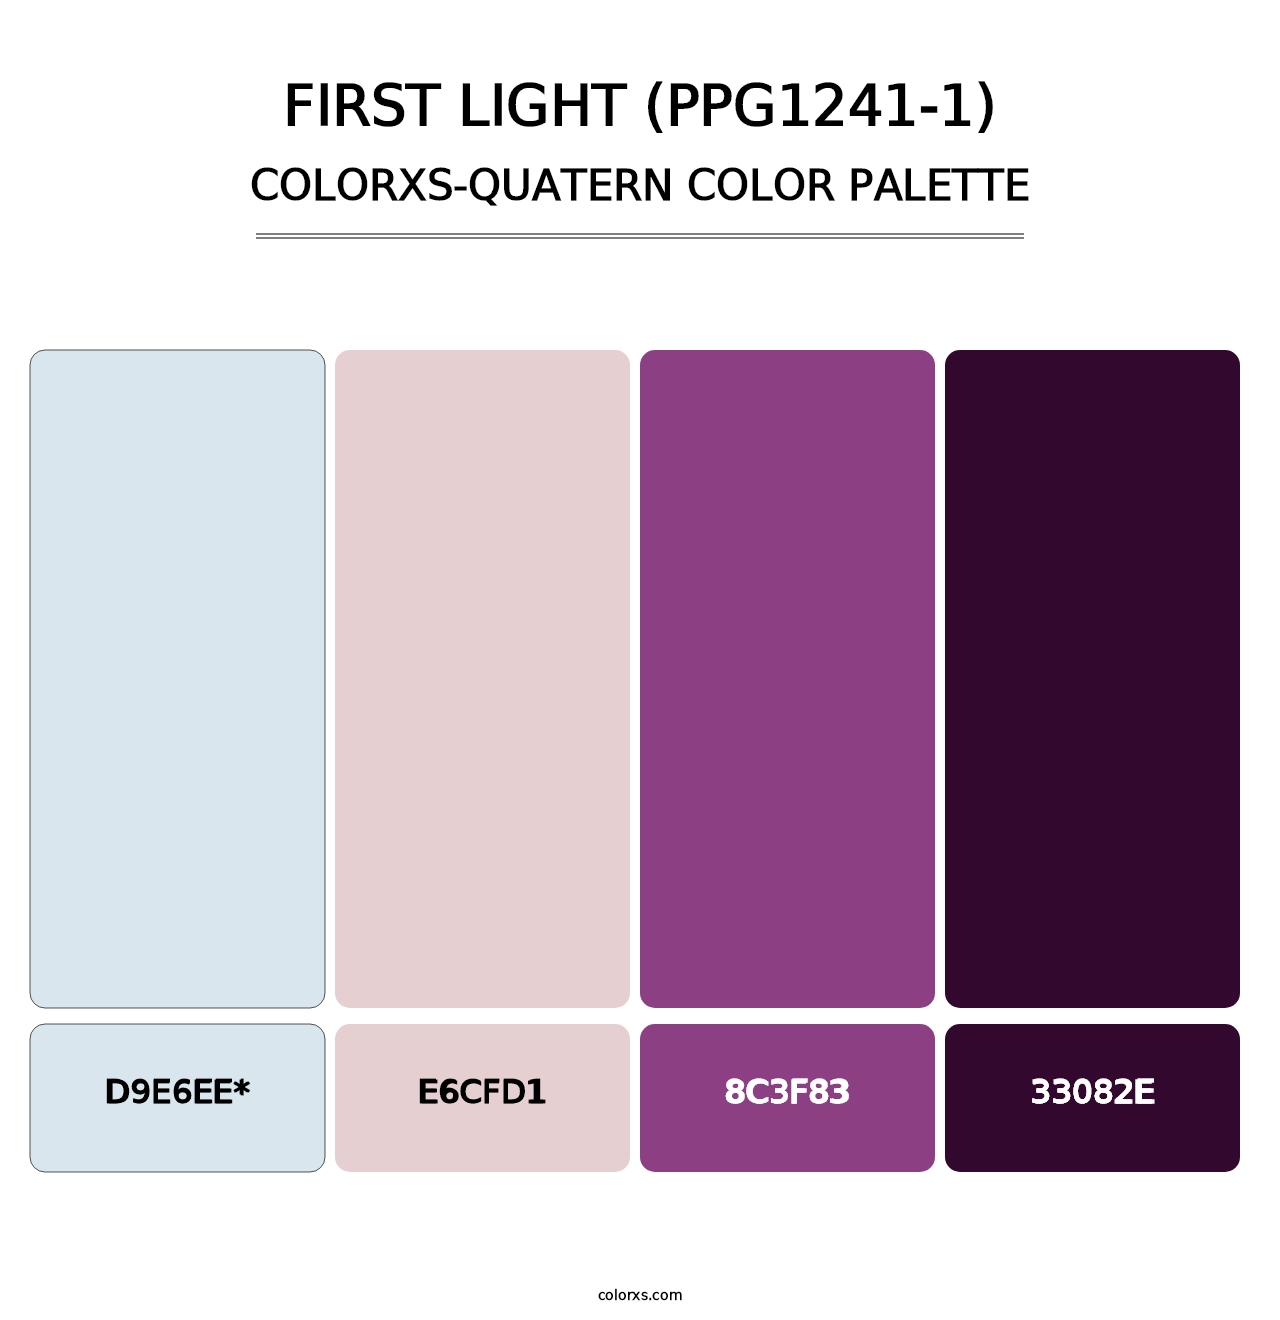 First Light (PPG1241-1) - Colorxs Quatern Palette